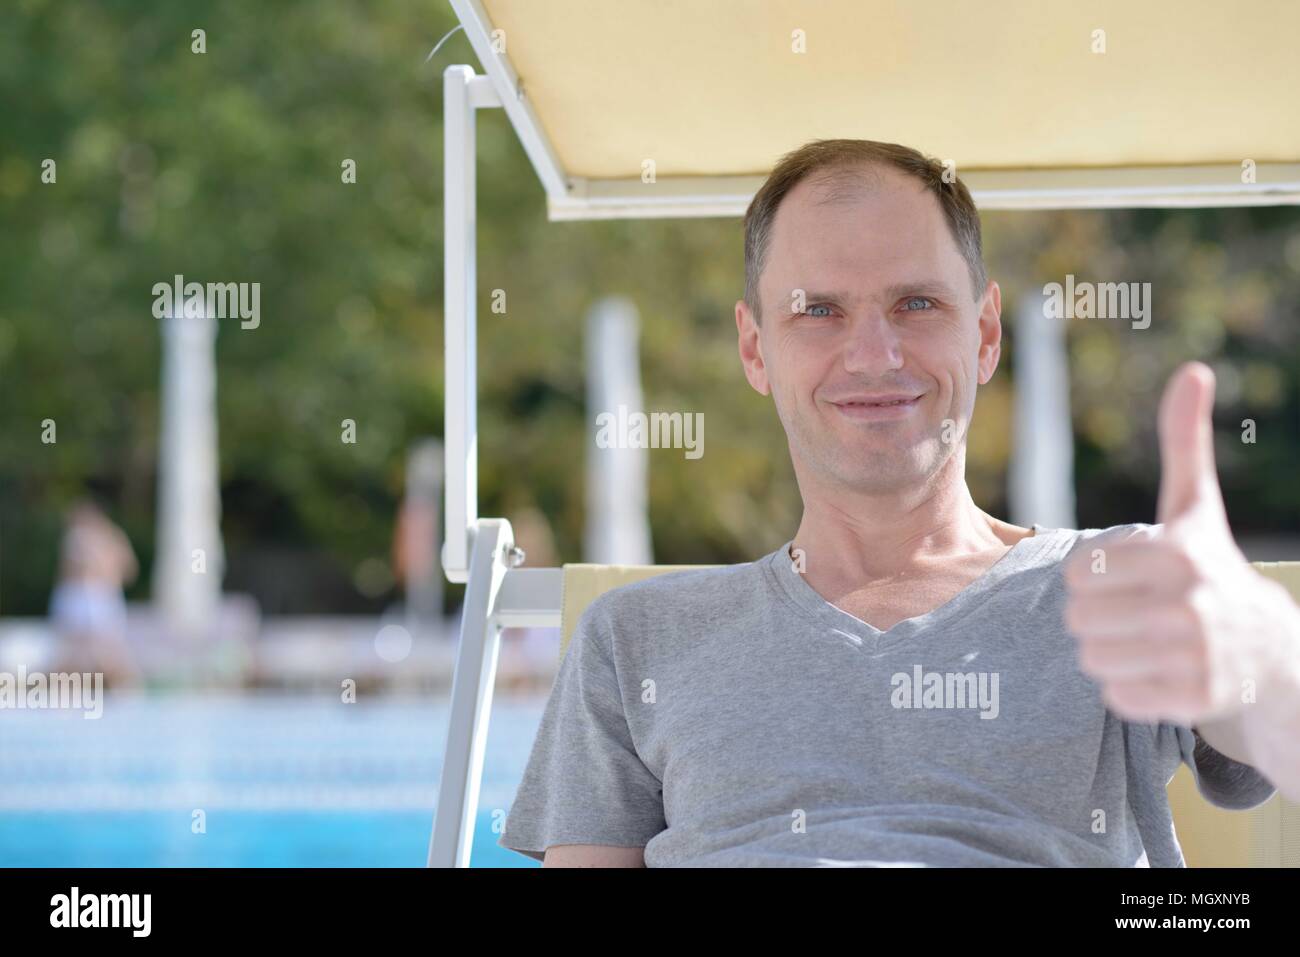 Man resting in a chaise lounge against a swimming pool and giving thumbs up sign Stock Photo